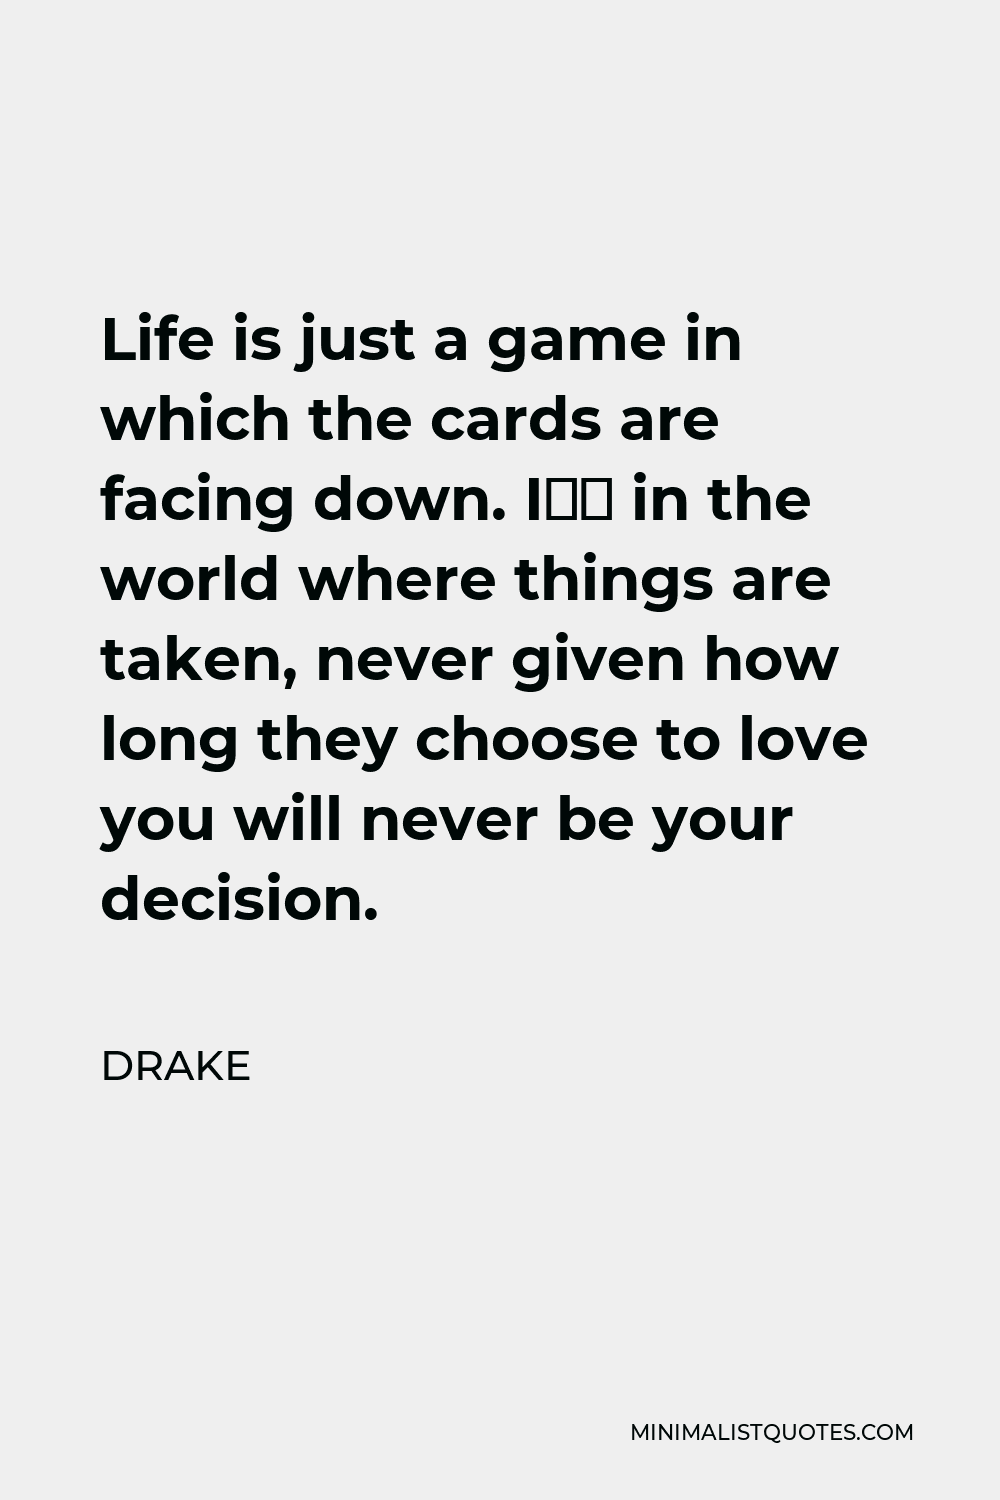 Drake Quote - Life is just a game in which the cards are facing down. I’m in the world where things are taken, never given how long they choose to love you will never be your decision.